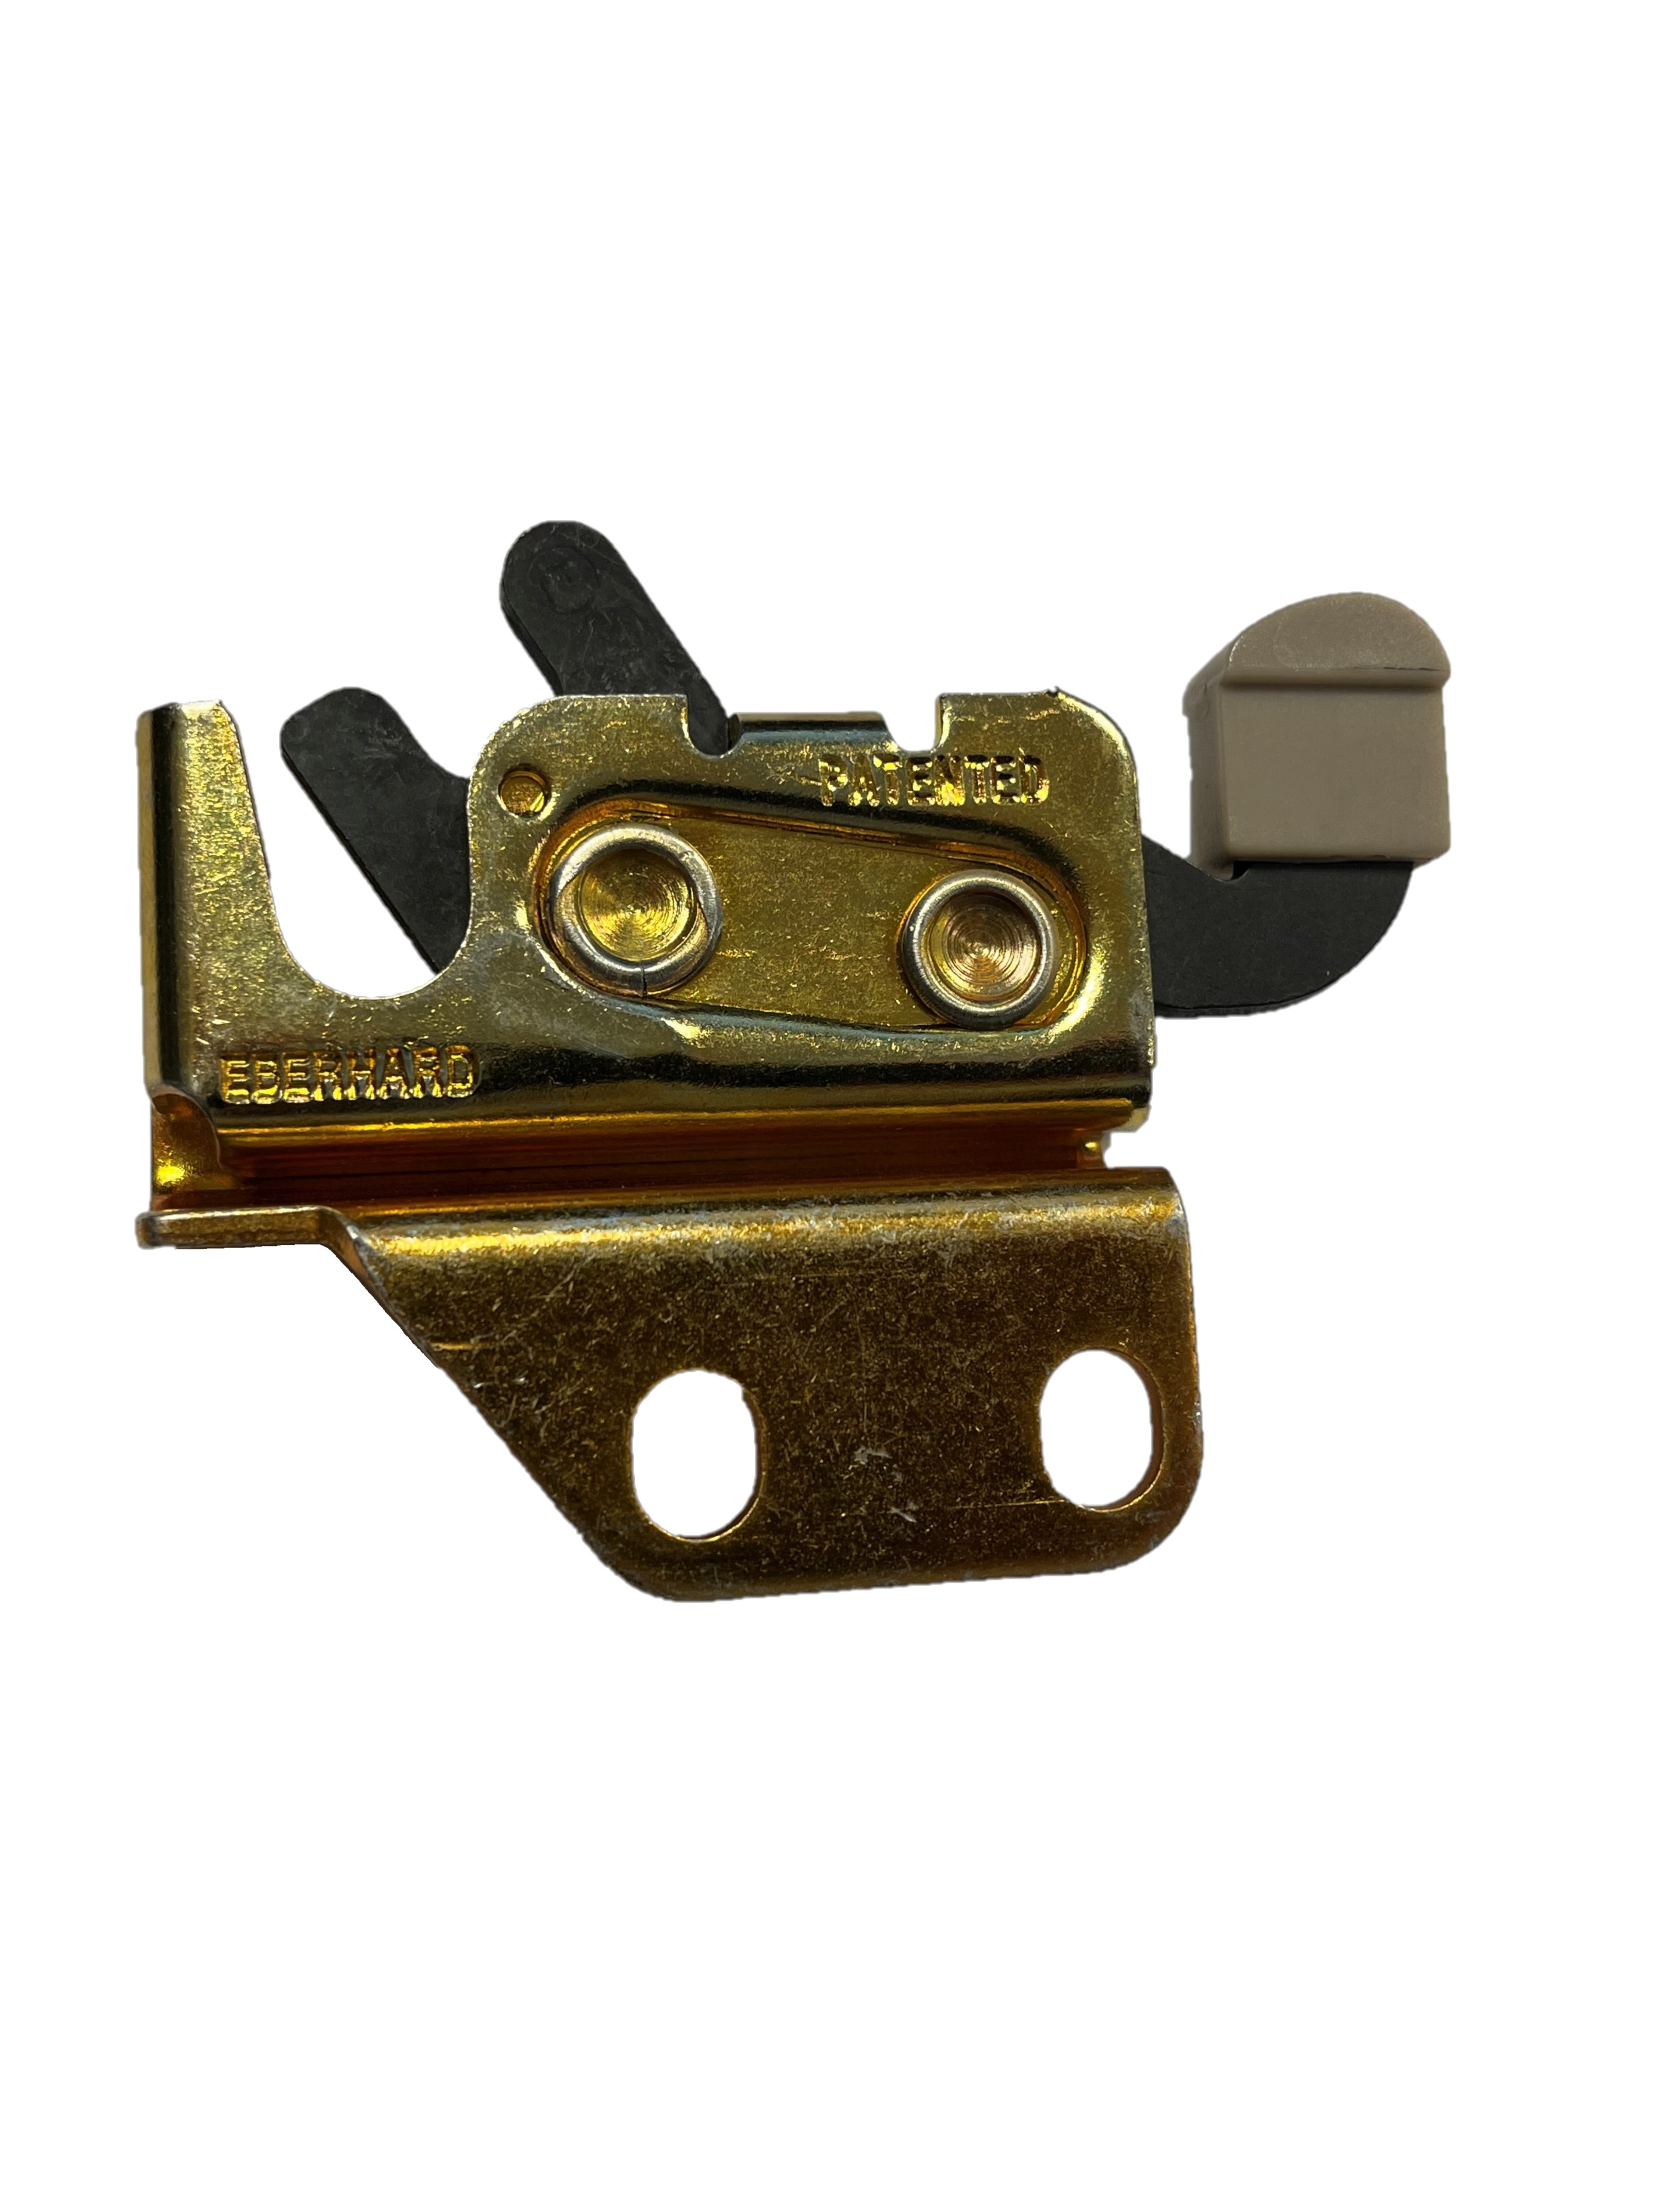 88-231-R-64Rotary Latch With Bracket and Overmold Grip, Right hand